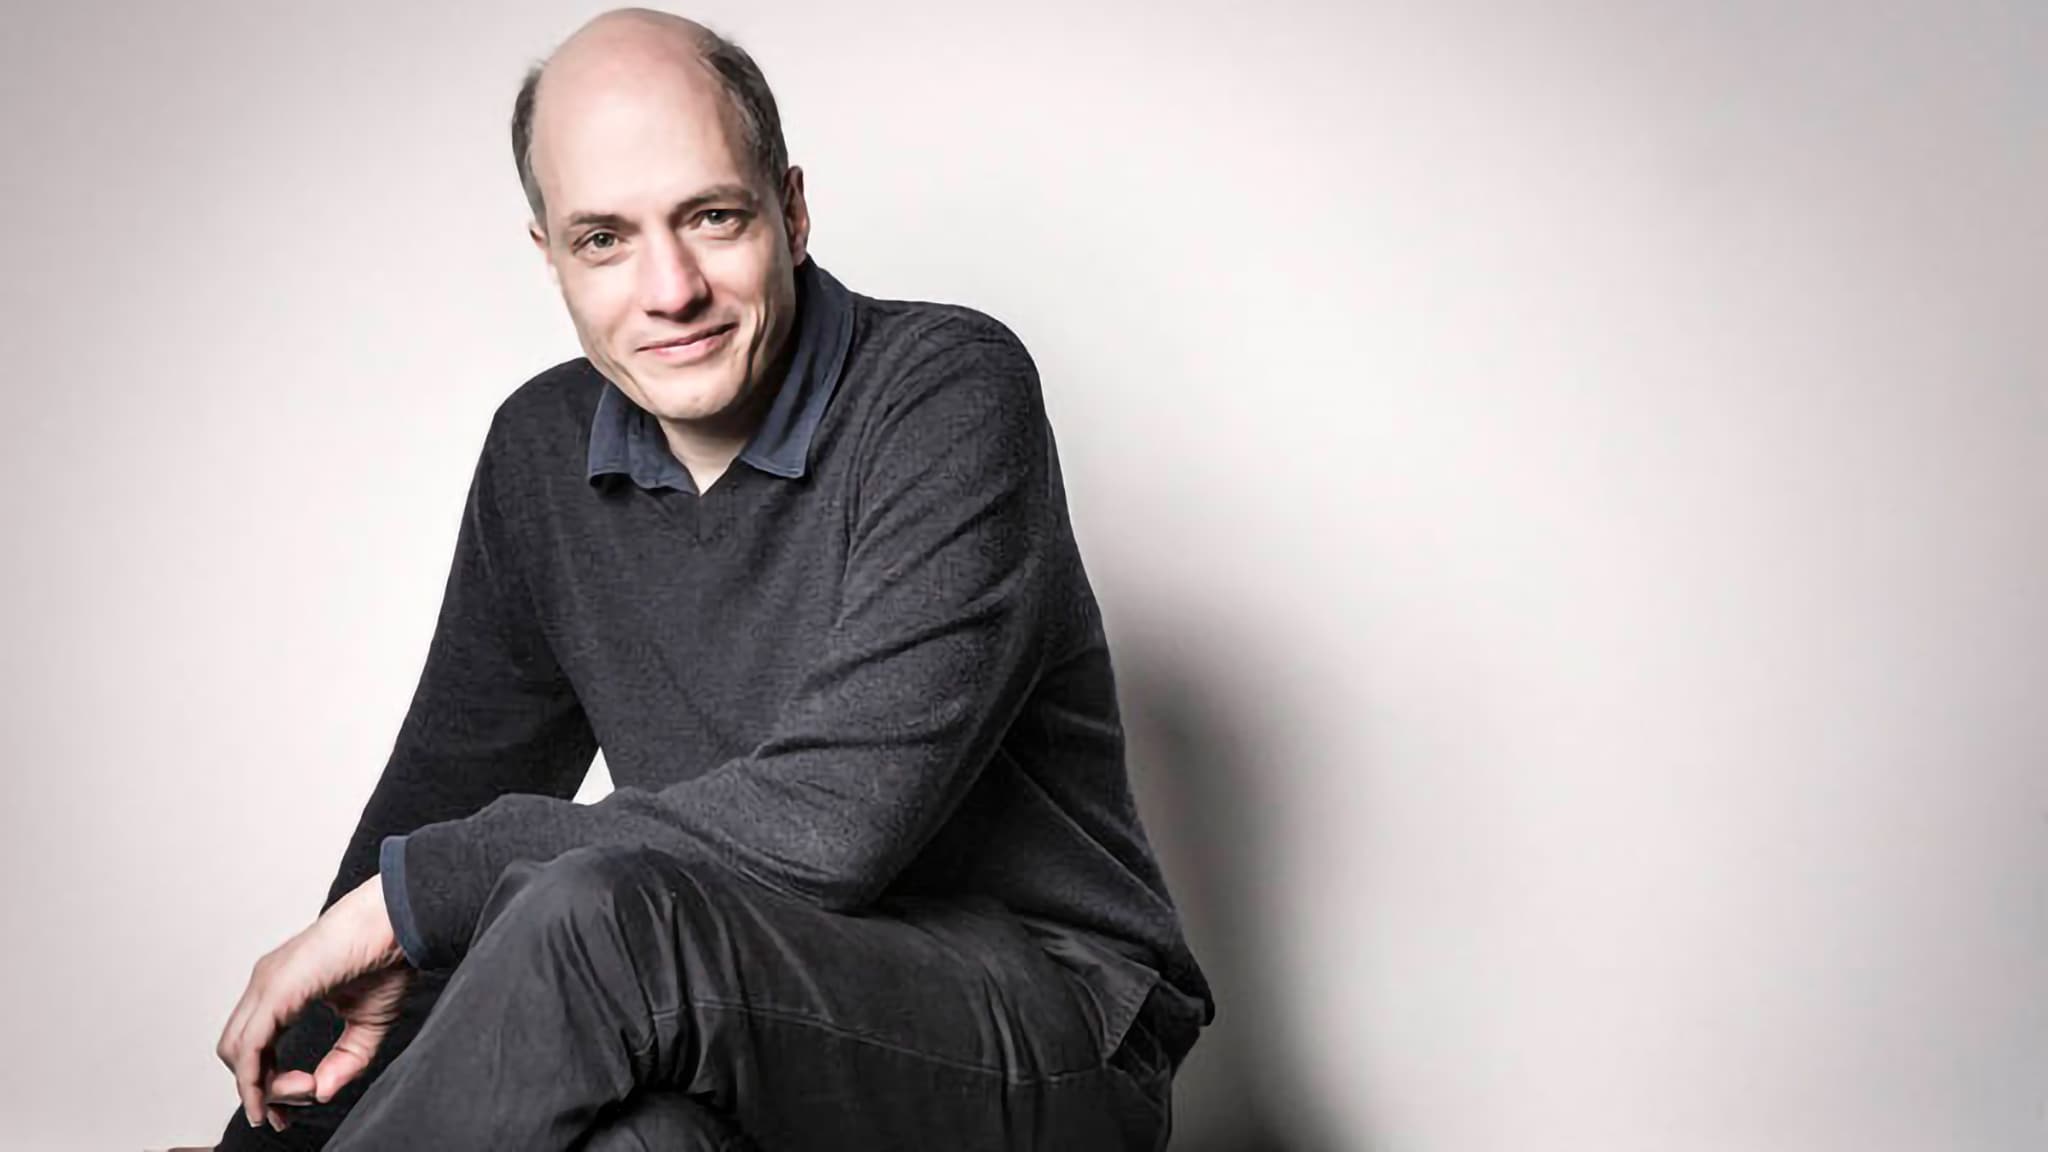 Alain De Botton Books On Love - What I'm reading: The Course of Love by ...